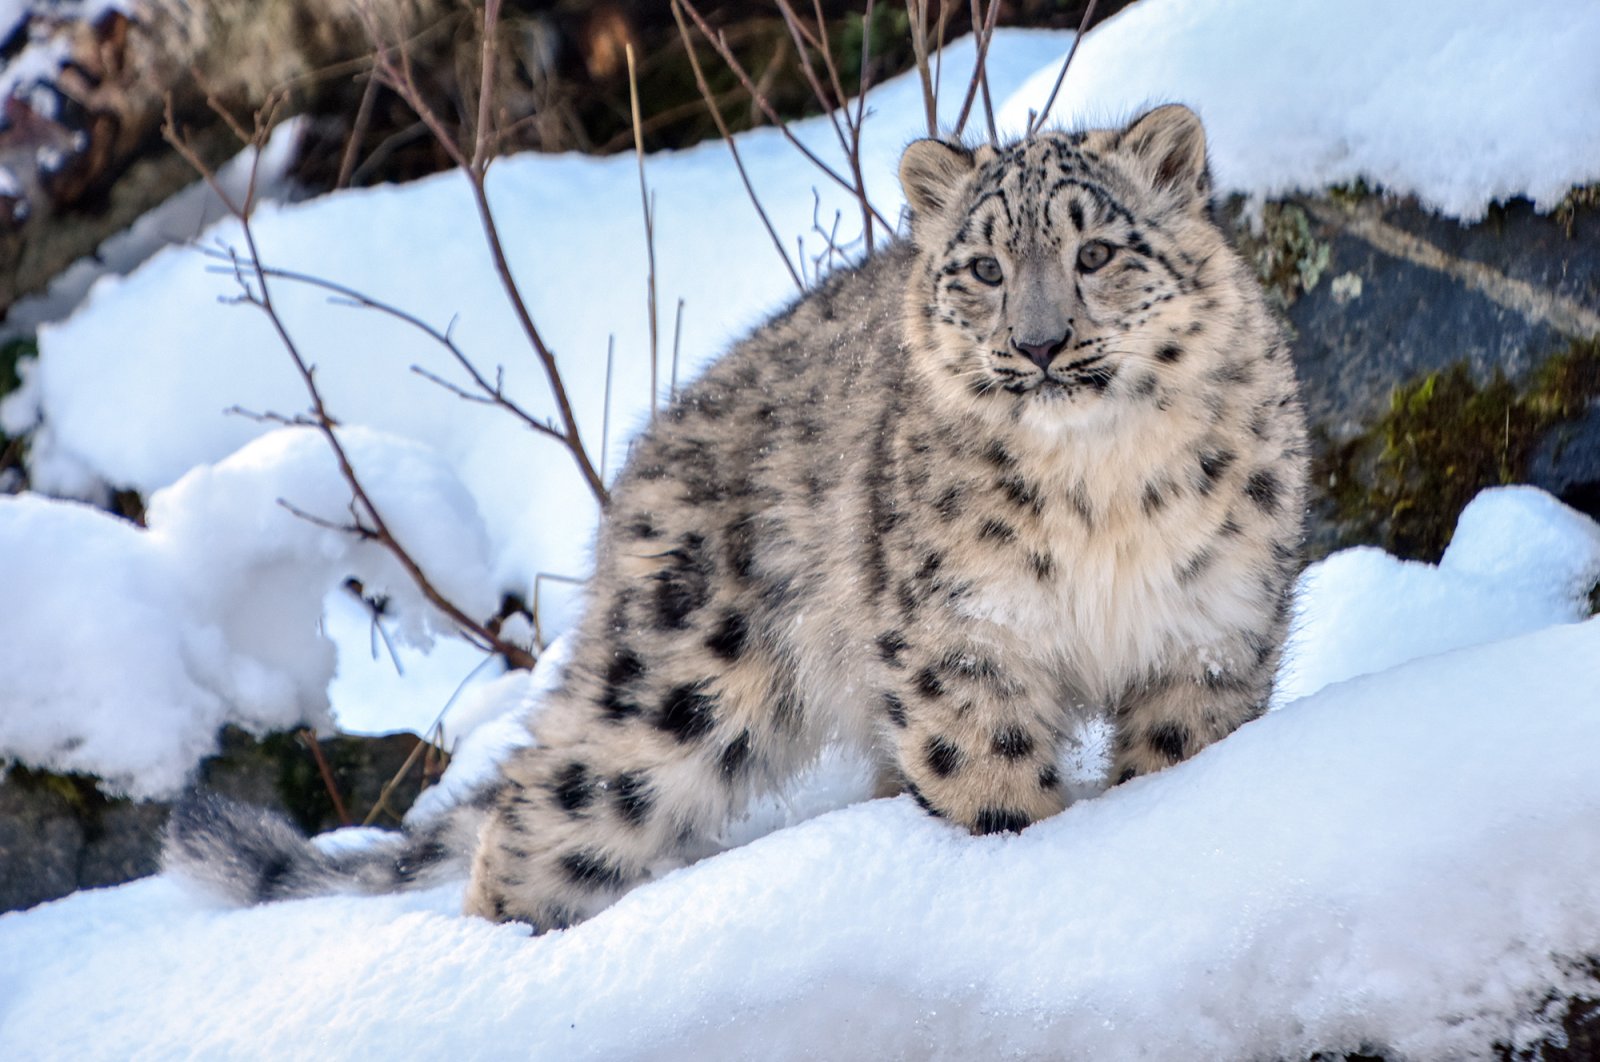 Leannain and Stardust, the 7-month-old snow leopard cubs at the Royal Zoological Society of Scotland’s Highland Wildlife Park, have been enjoying the winter weather at their home in Cairngorms National Park. (Reuters File Photo)
